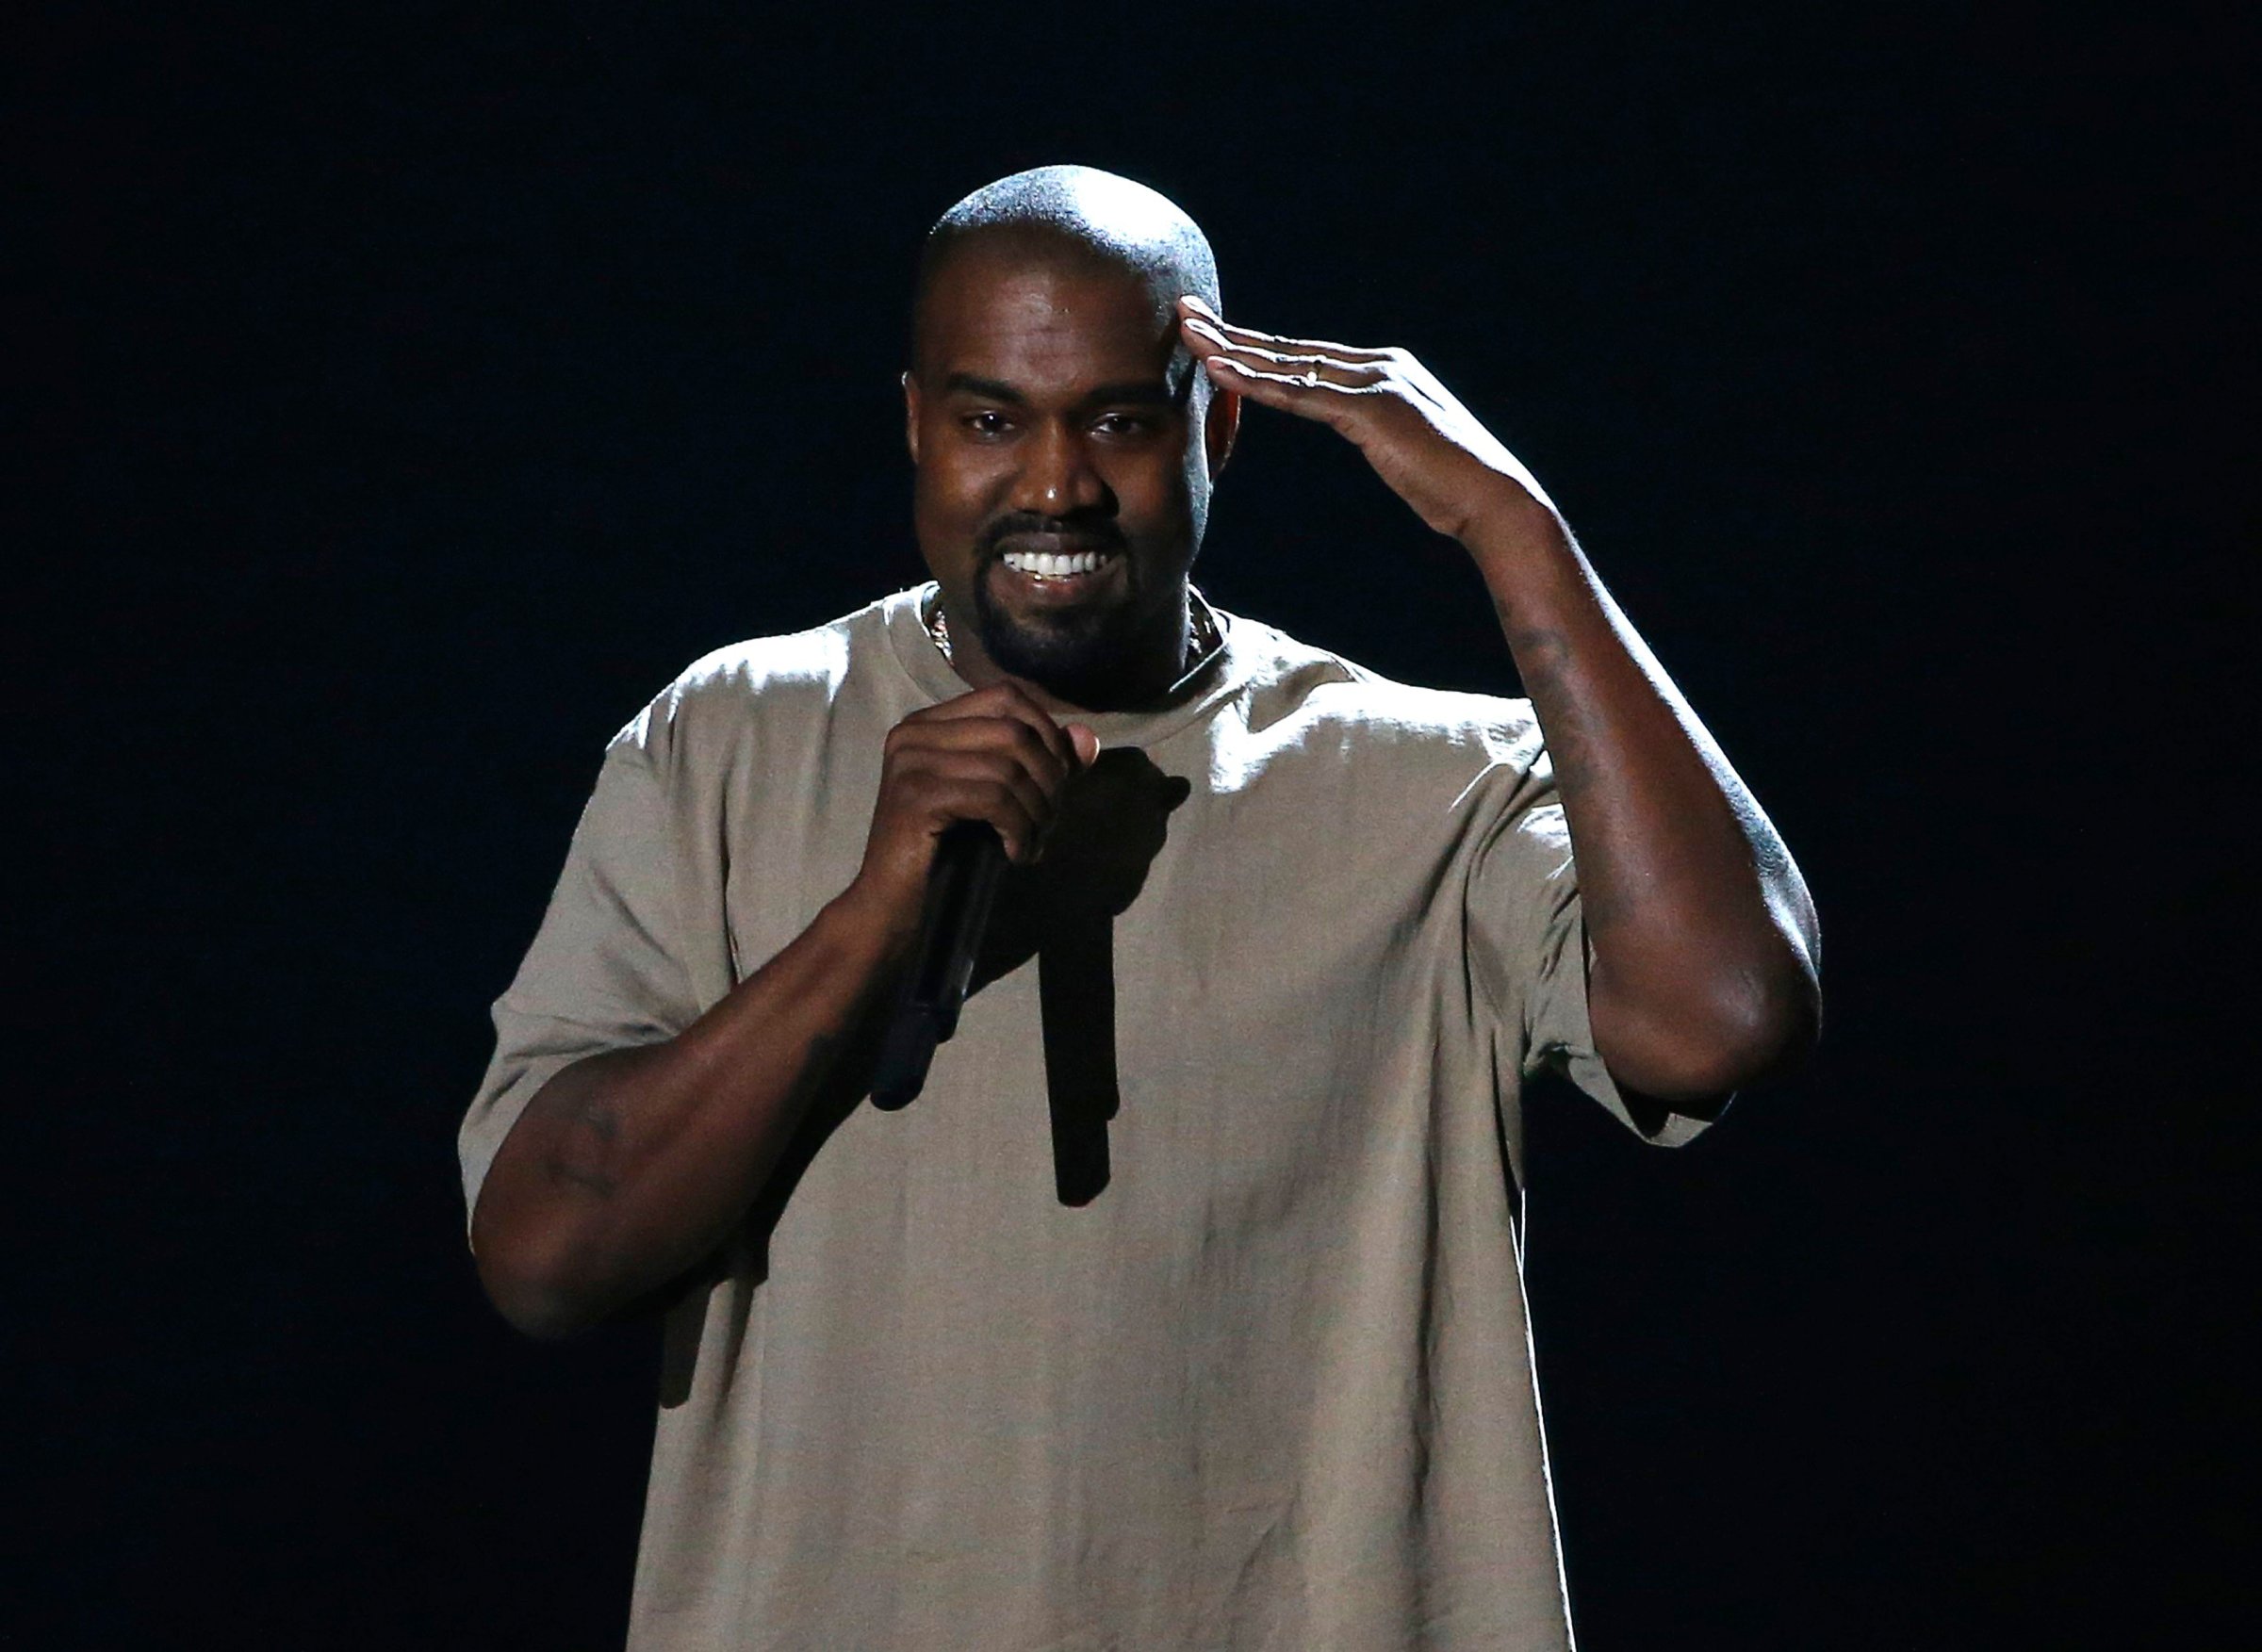 Kanye West accepts the Video Vanguard Award at the 2015 MTV Video Music Awards in Los Angeles on August 30, 2015.